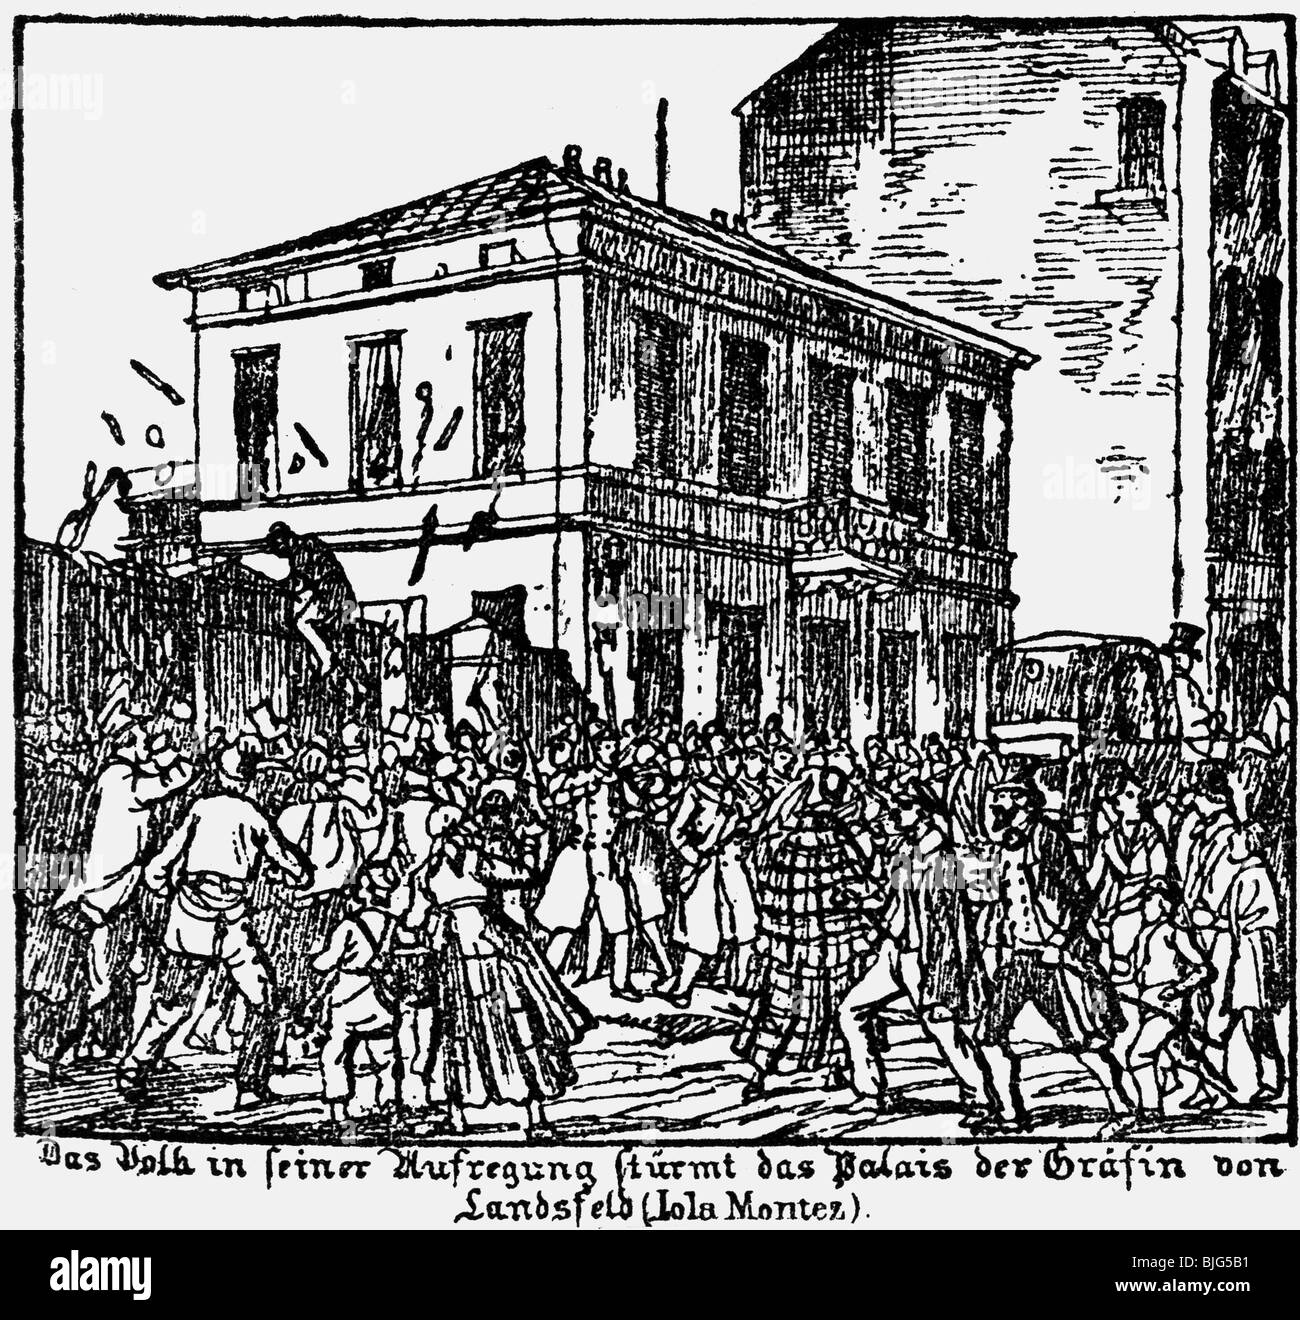 events, revolution 1848 - 1849, February riots in Munich, angry crowd in front of the house of Lola Montez, 10.2.1848, contemporary lithograph by Gustav Kraus, Revolution, Palais, countess Landsfeld, turmoil, riot, mob, Germany, Bavaria, 19th century, historic, historical, people, Stock Photo